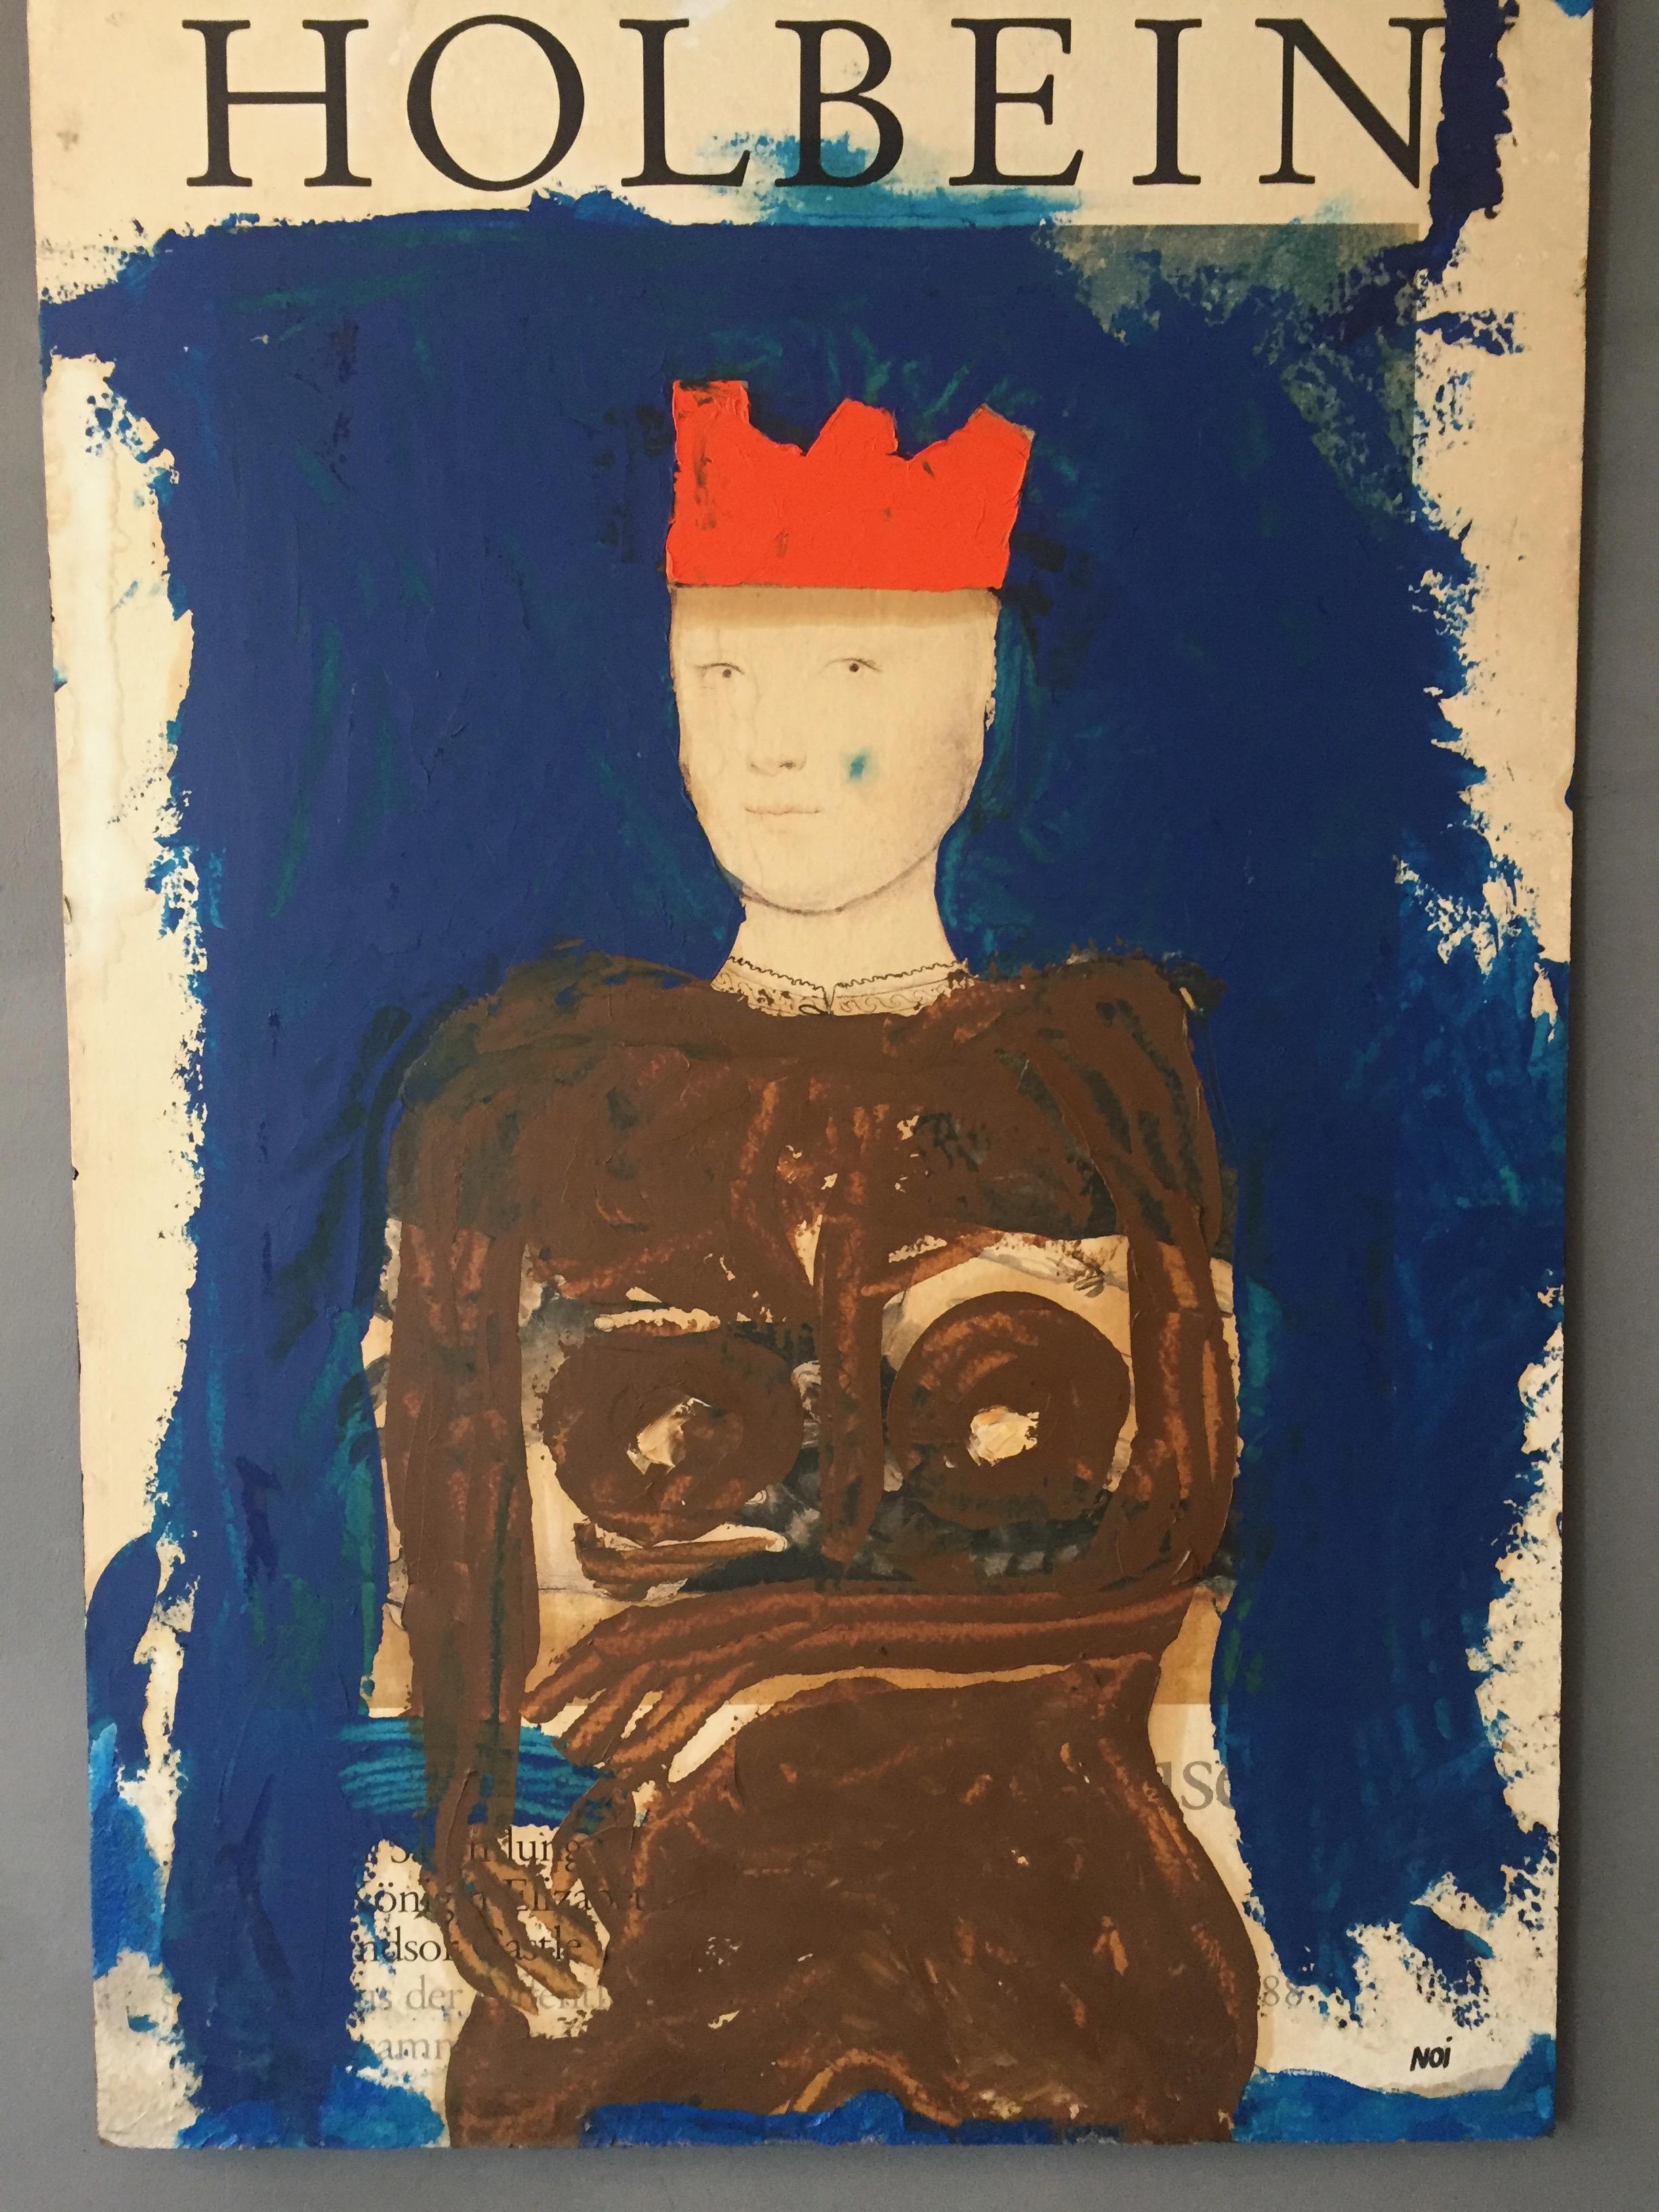 Holbein Exhibition Poster on wood board, spatular technic and painted by Staab. A great example of Staabs remix series with Kings and Queens. Everyone is a Queen/King for his/hers own reality - therefor we are all Kings and Queens.

M.F.Staab